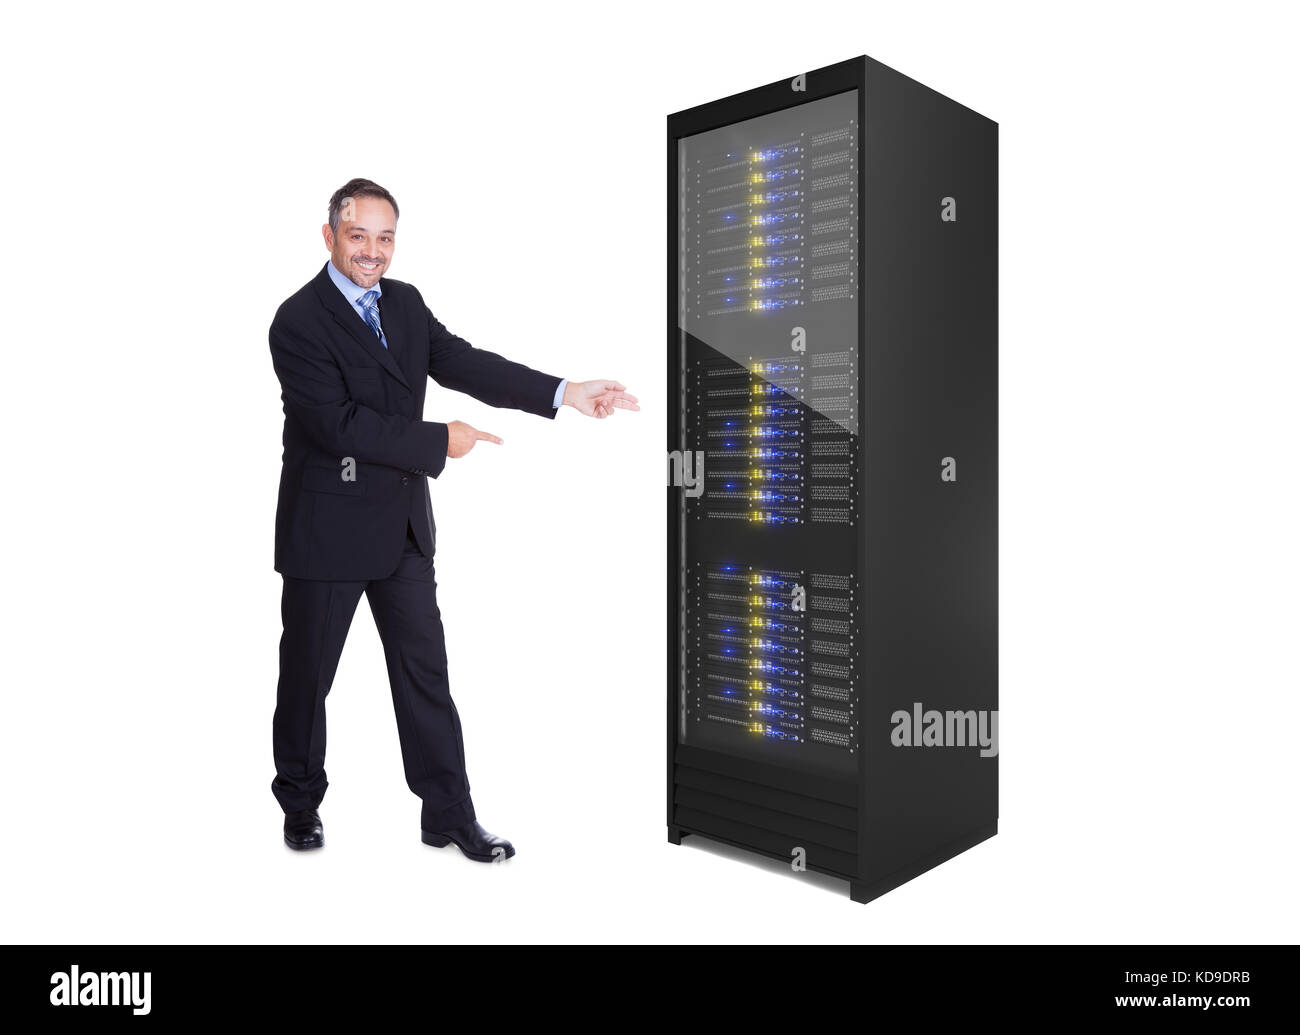 Businessman presenting server rack. Isolated on white Banque D'Images